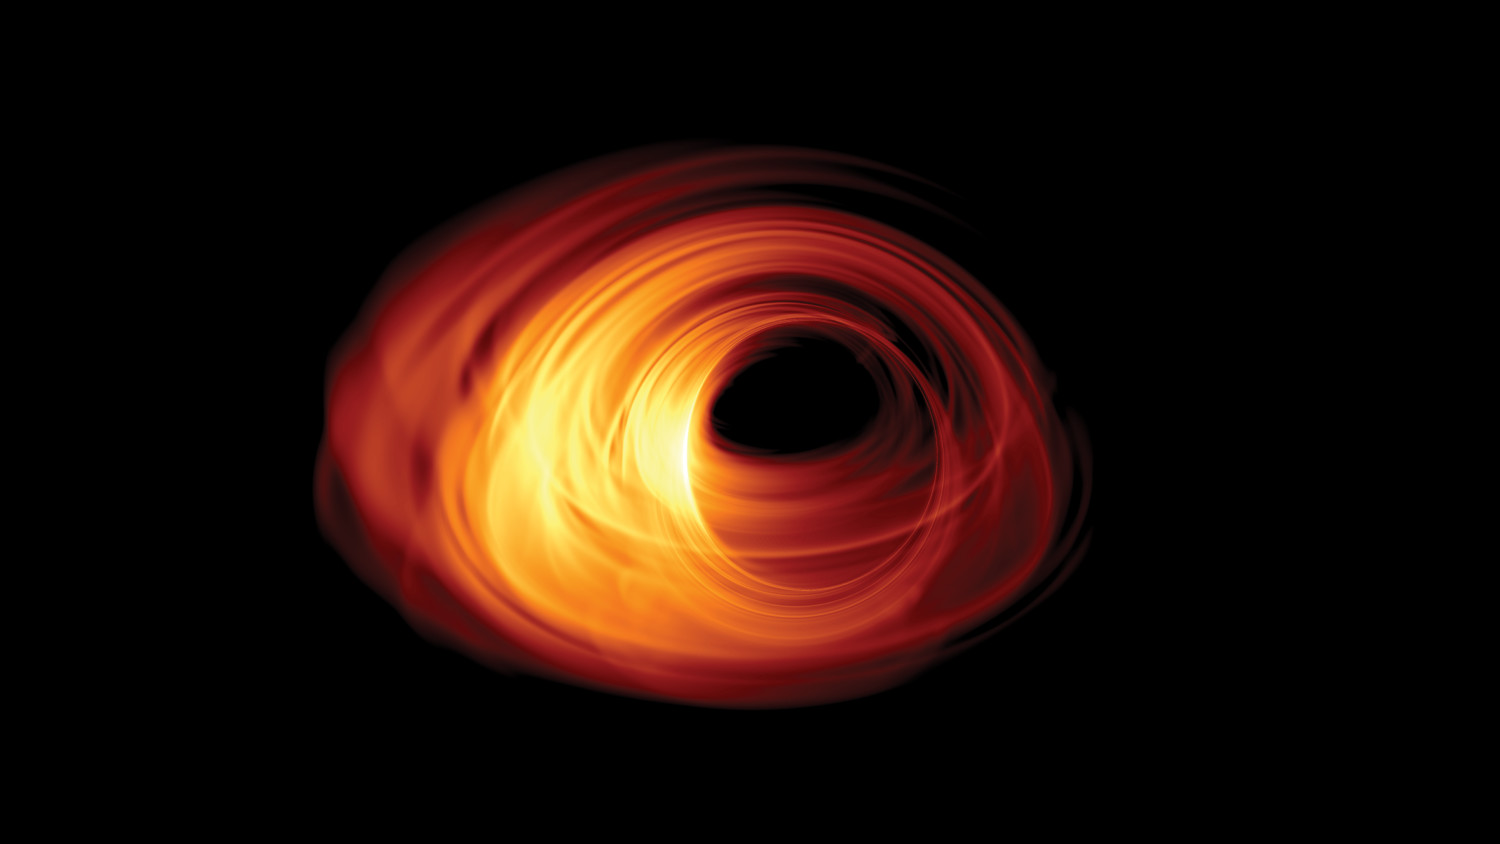 Simulated image of an accreting black hole.